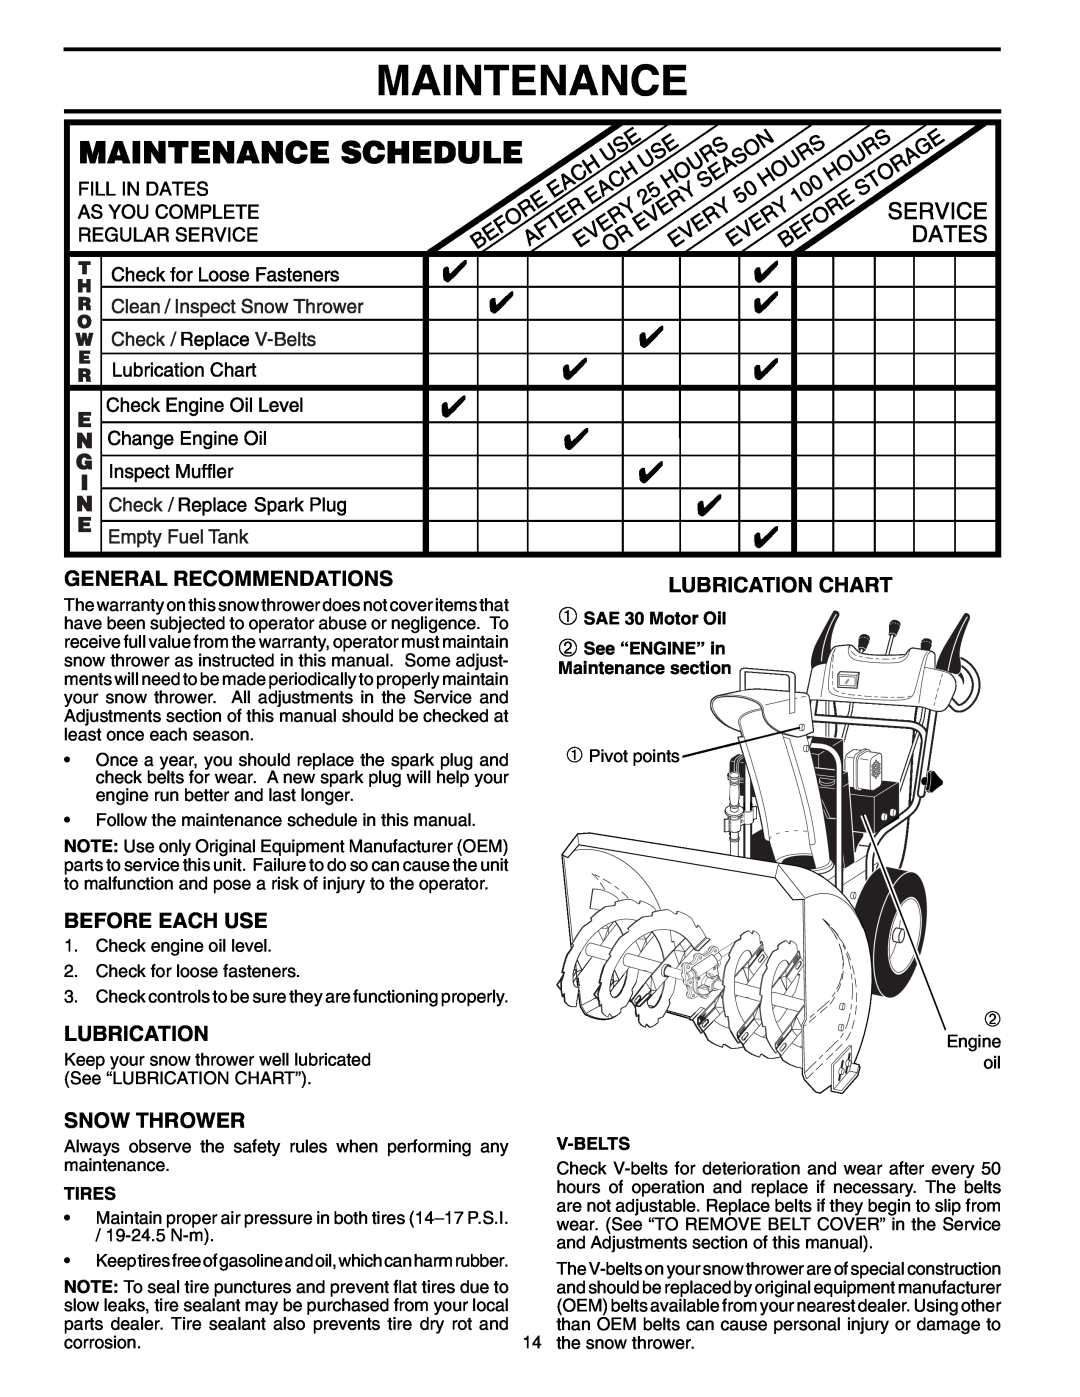 Poulan 96192000600 Maintenance, General Recommendations, Before Each Use, Lubrication Chart, Snow Thrower, Tires 